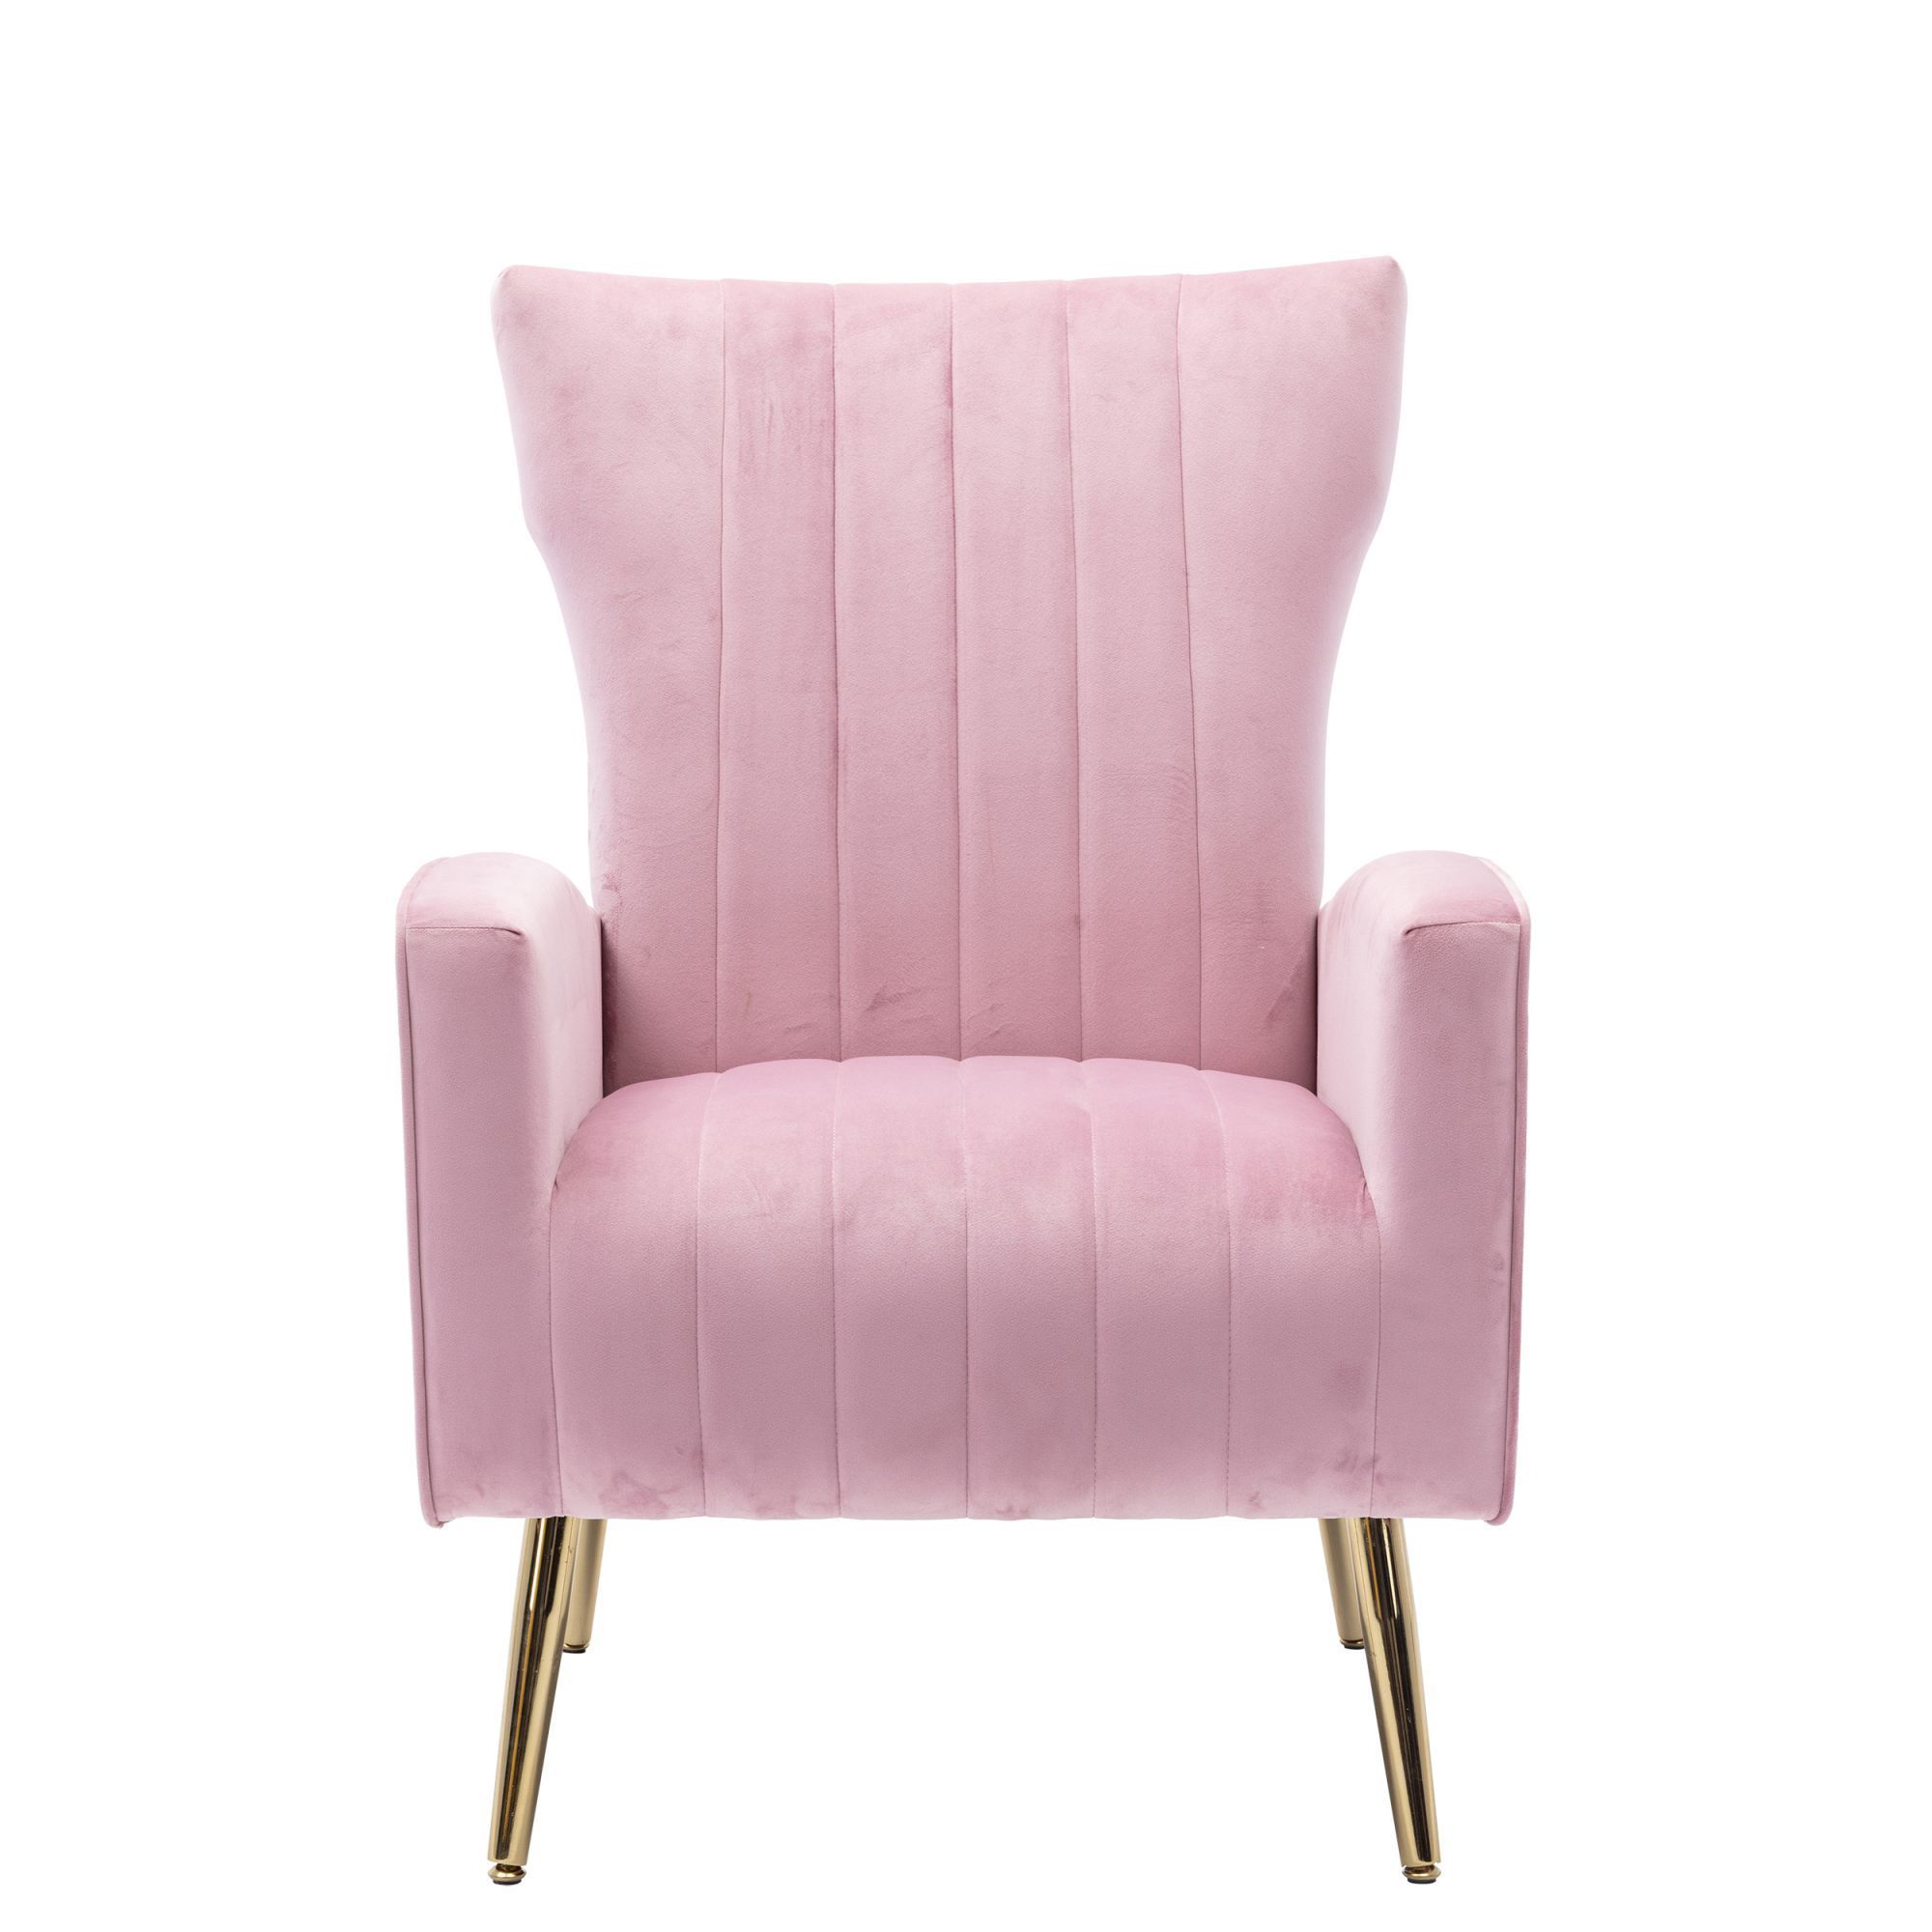 Modern upholstered armchair anchored with lustrous gold finished legs-CASAINC